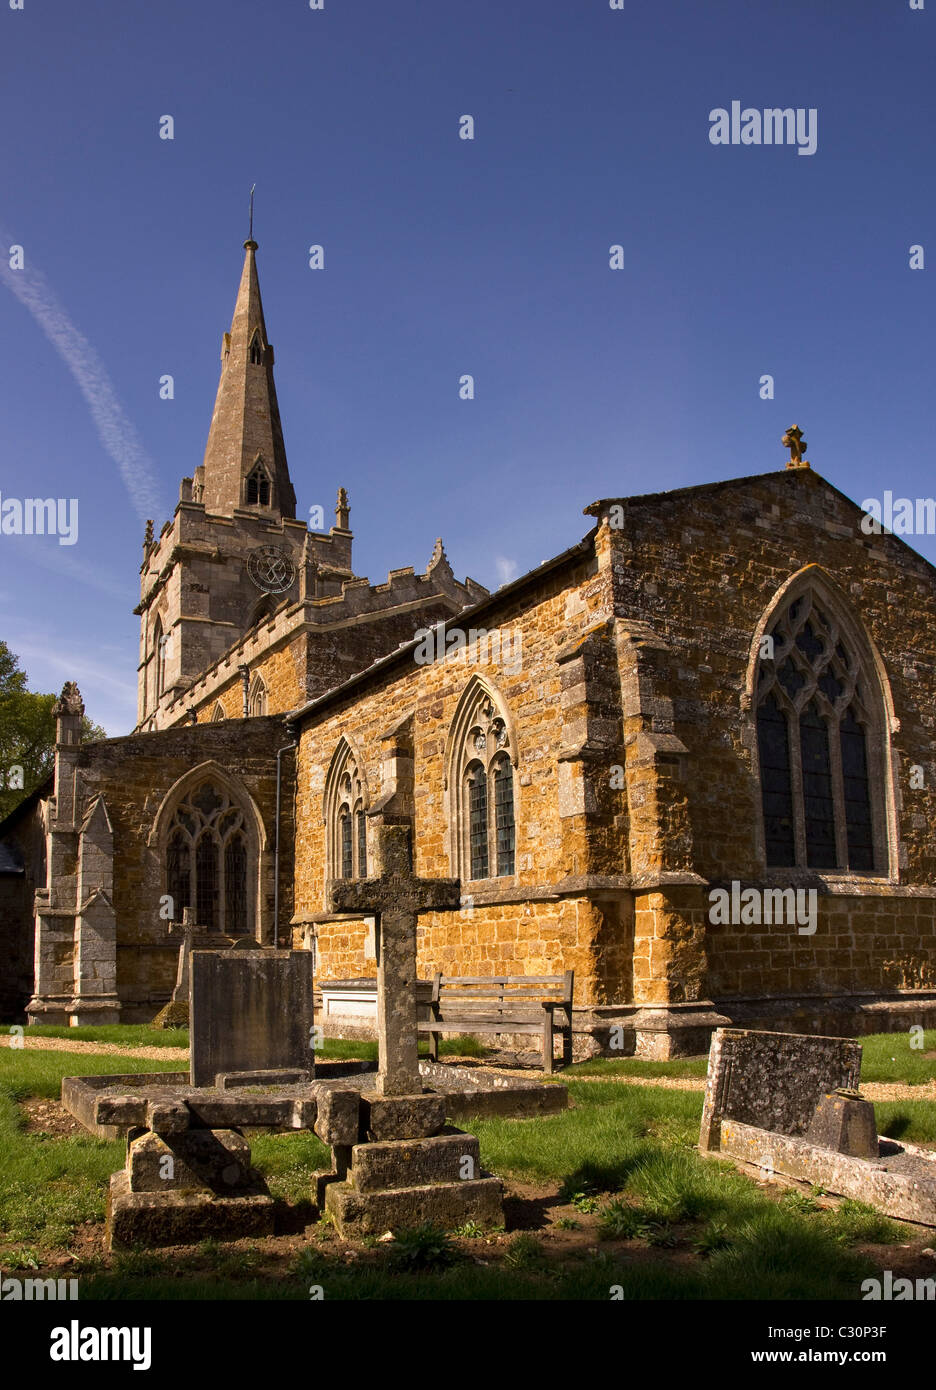 St. John The Baptist Parish Church and gravestones in the village of Cold Overton, Leicestershire, England, UK Stock Photo